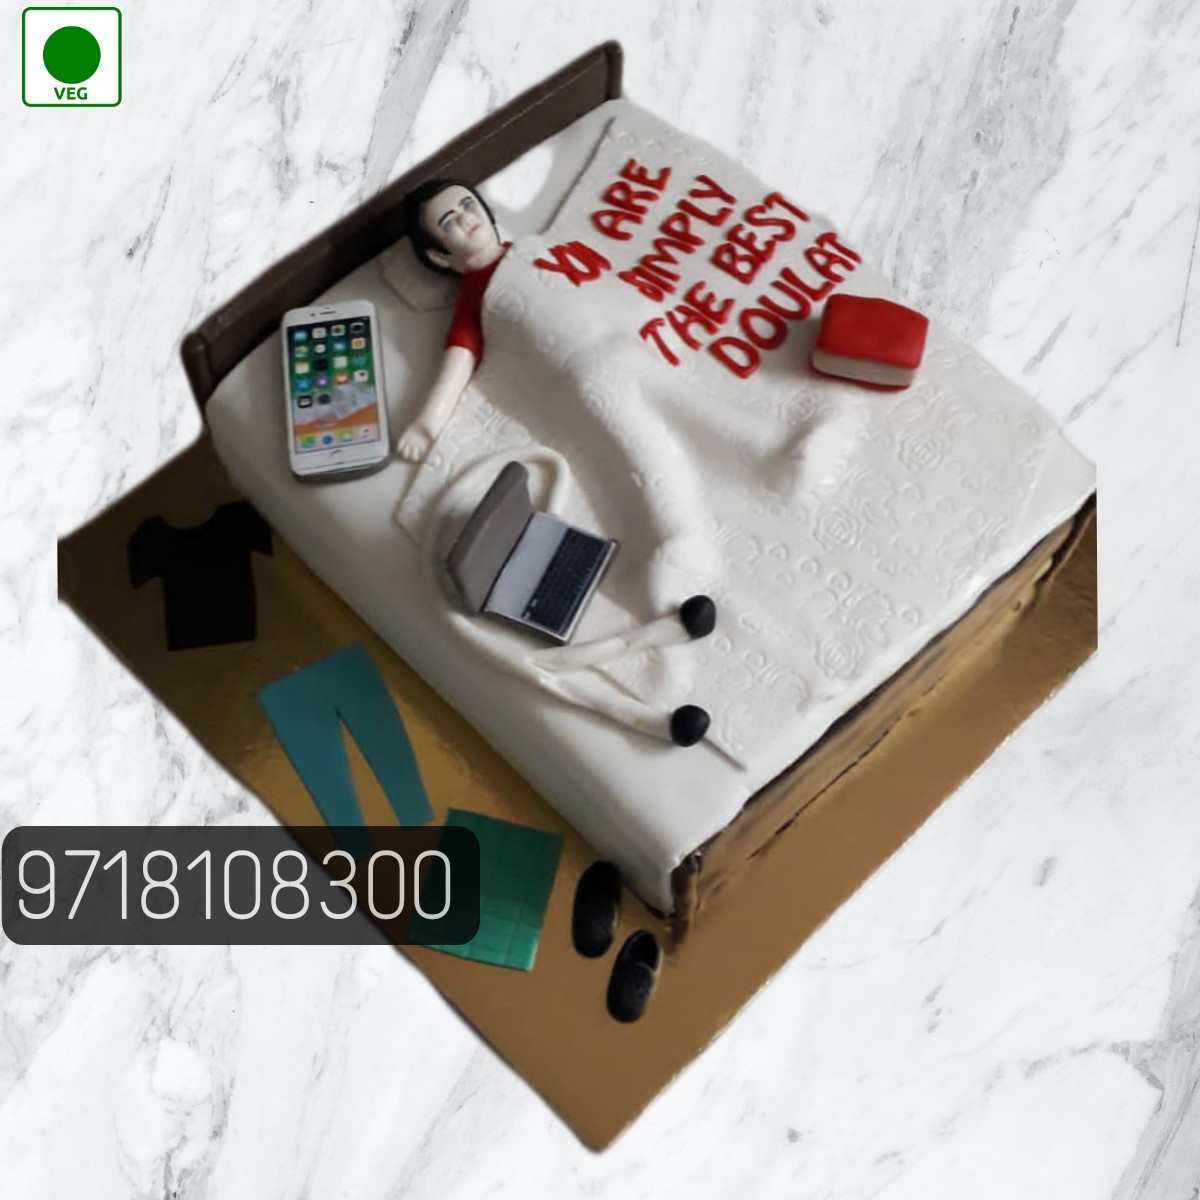 Birthday Cake For Husband @ 449, 10% OFF, Free Shipping-Flavours Guru